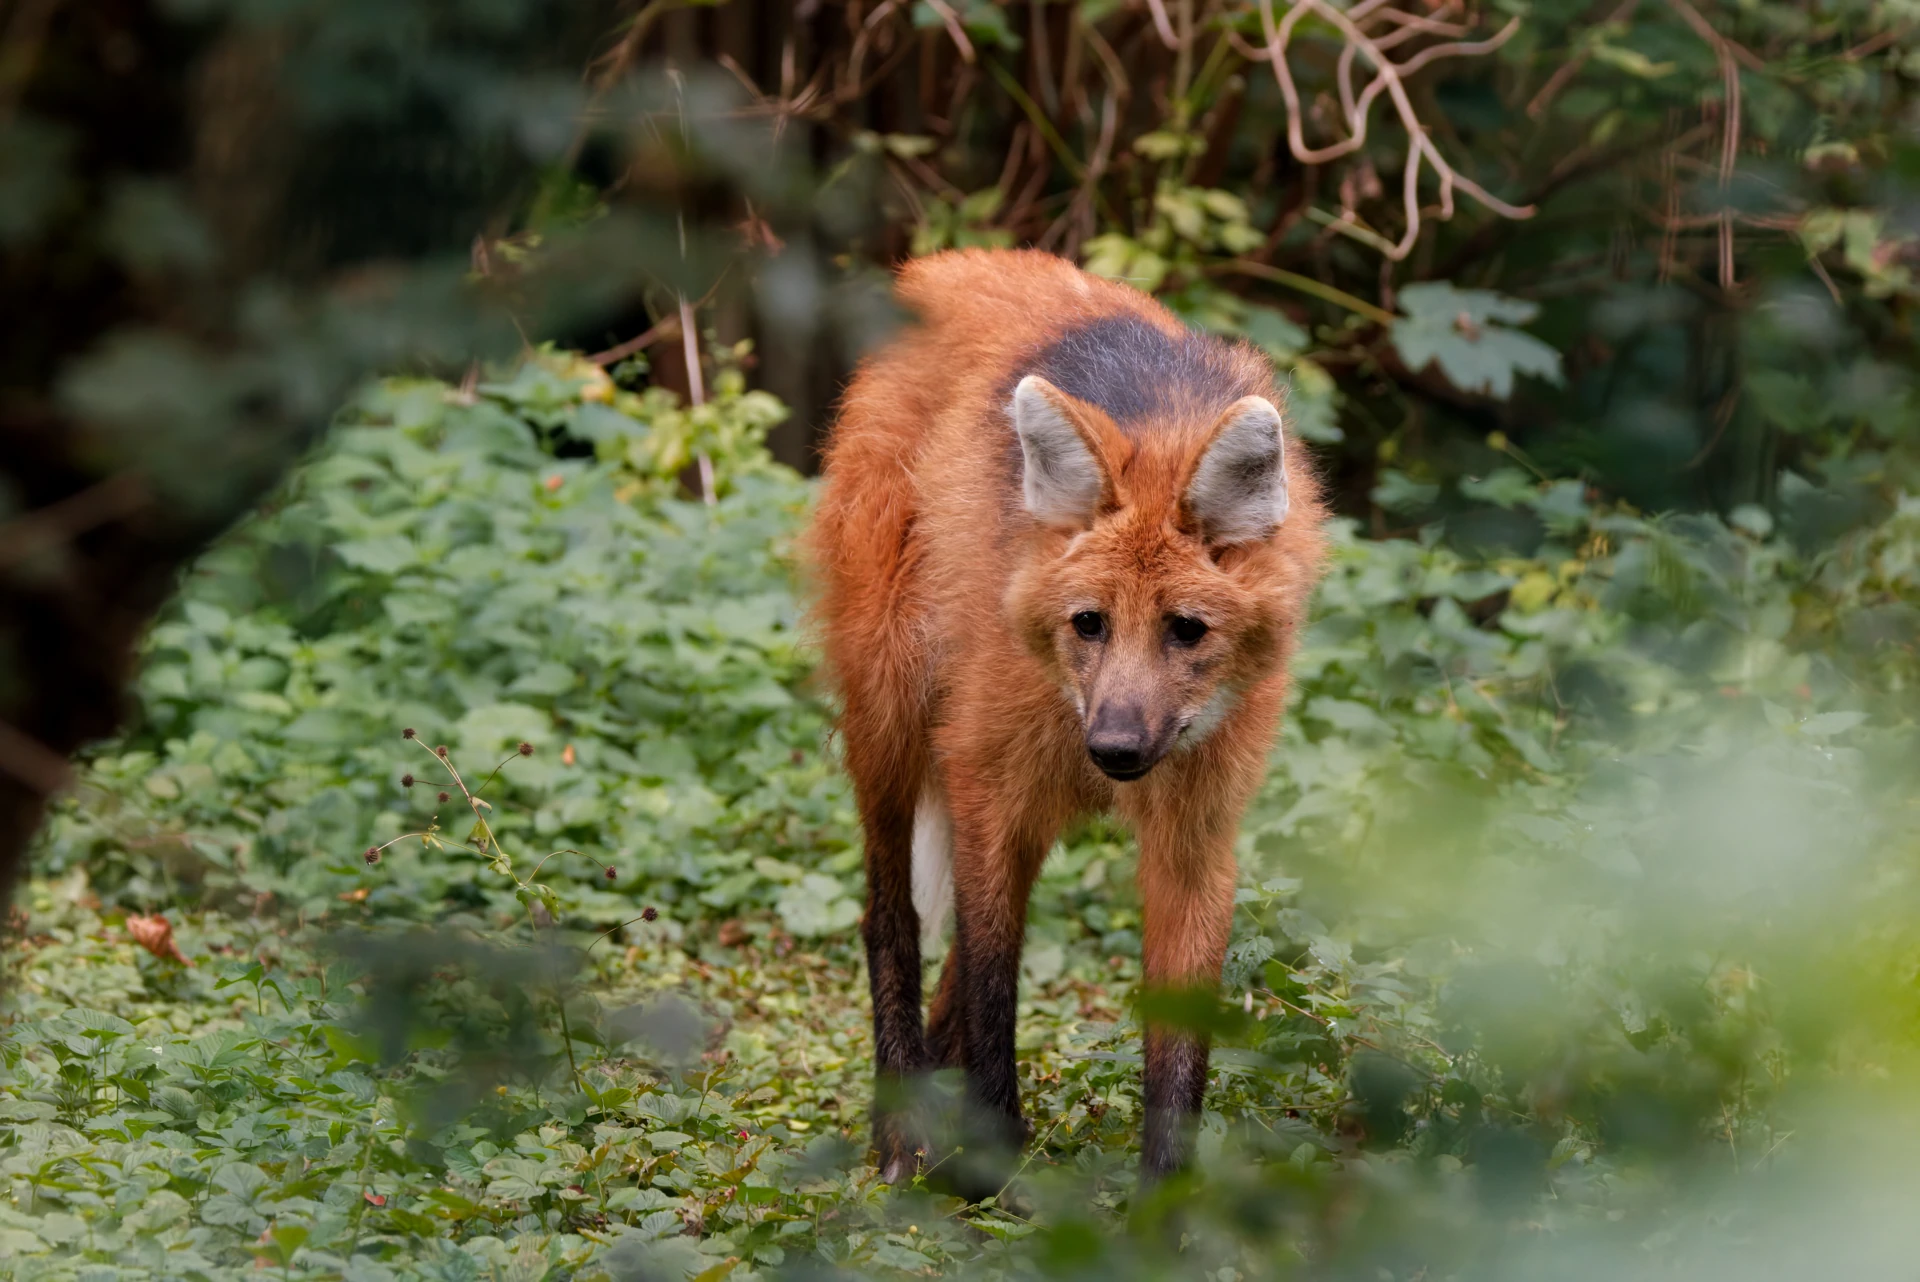 A maned wolf approaching through thick undergrowth.